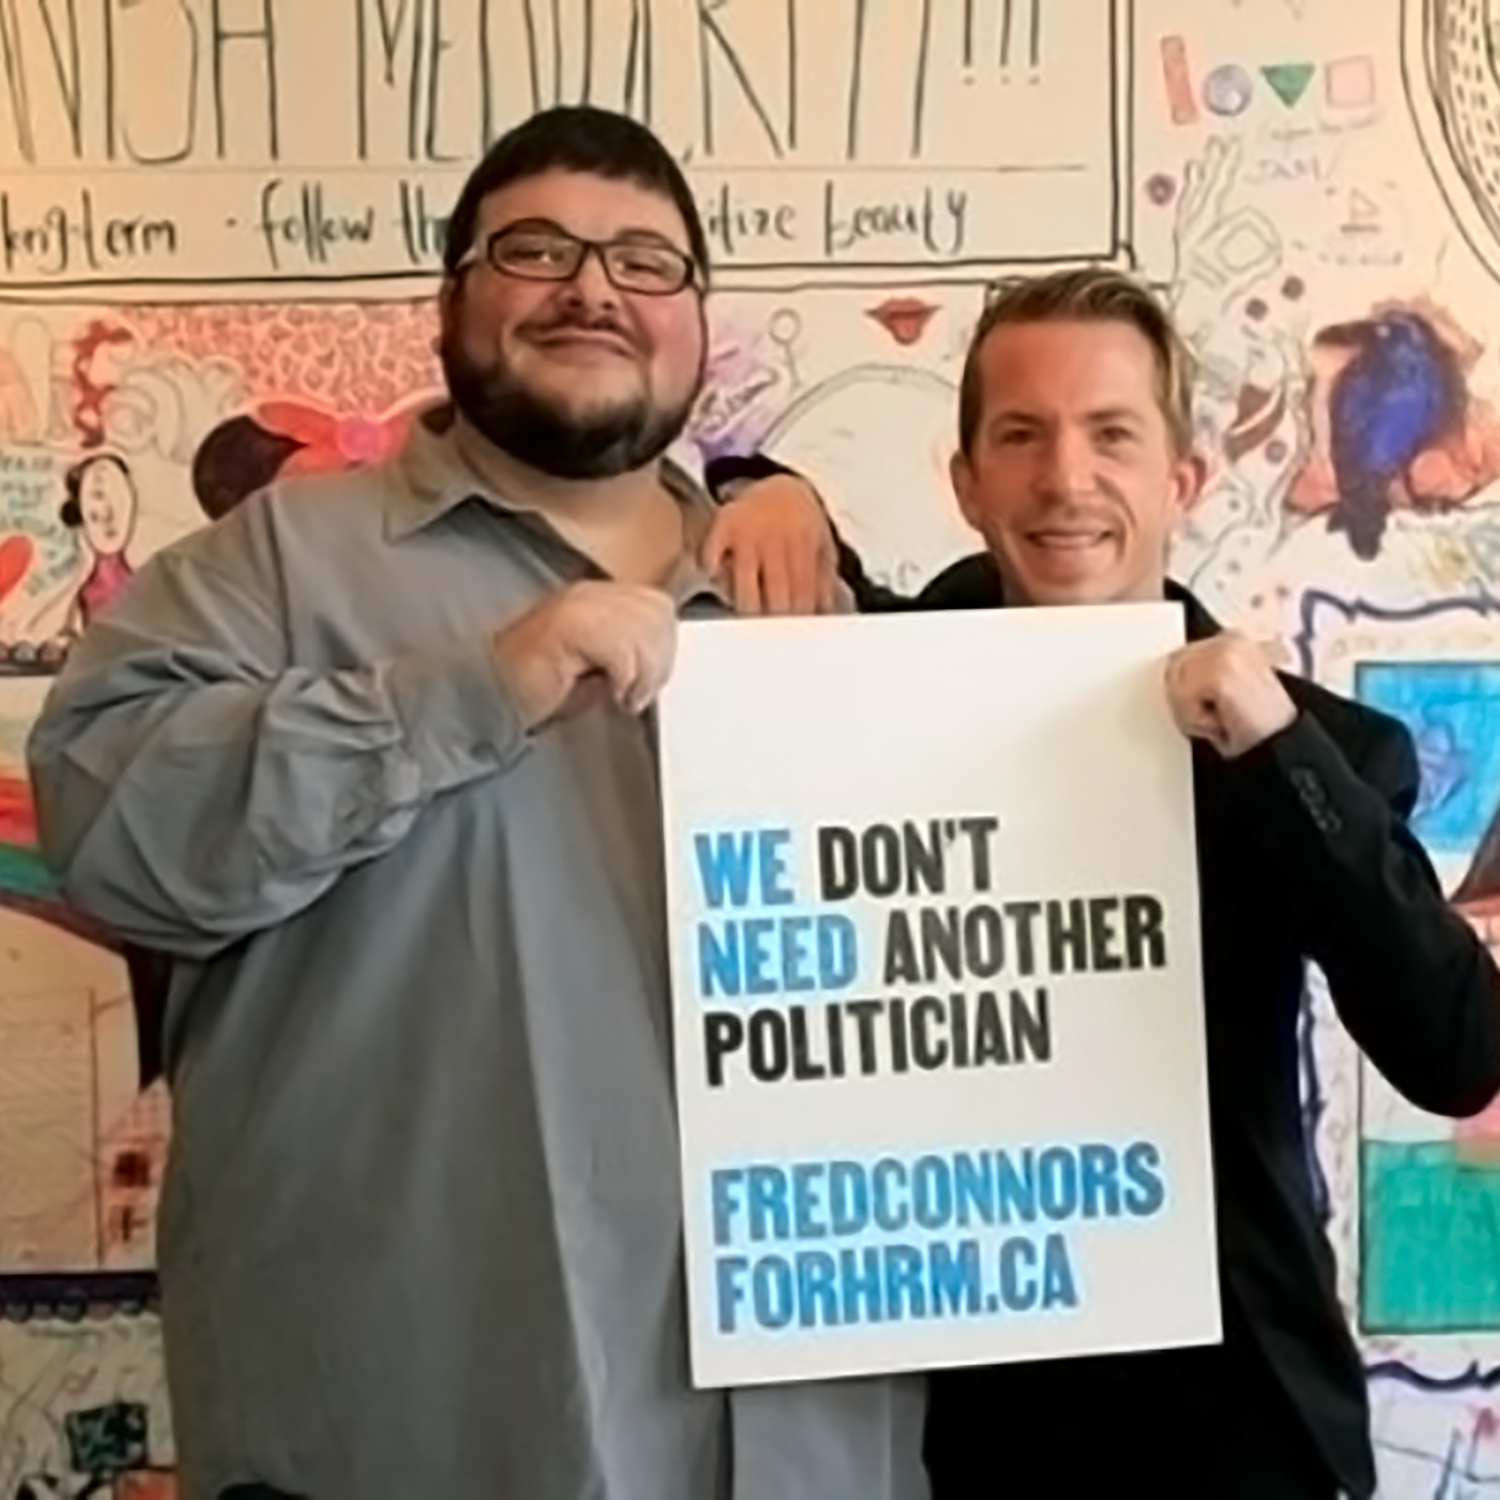 We don’t need another politician. We need fredconnorsforhrm.ca